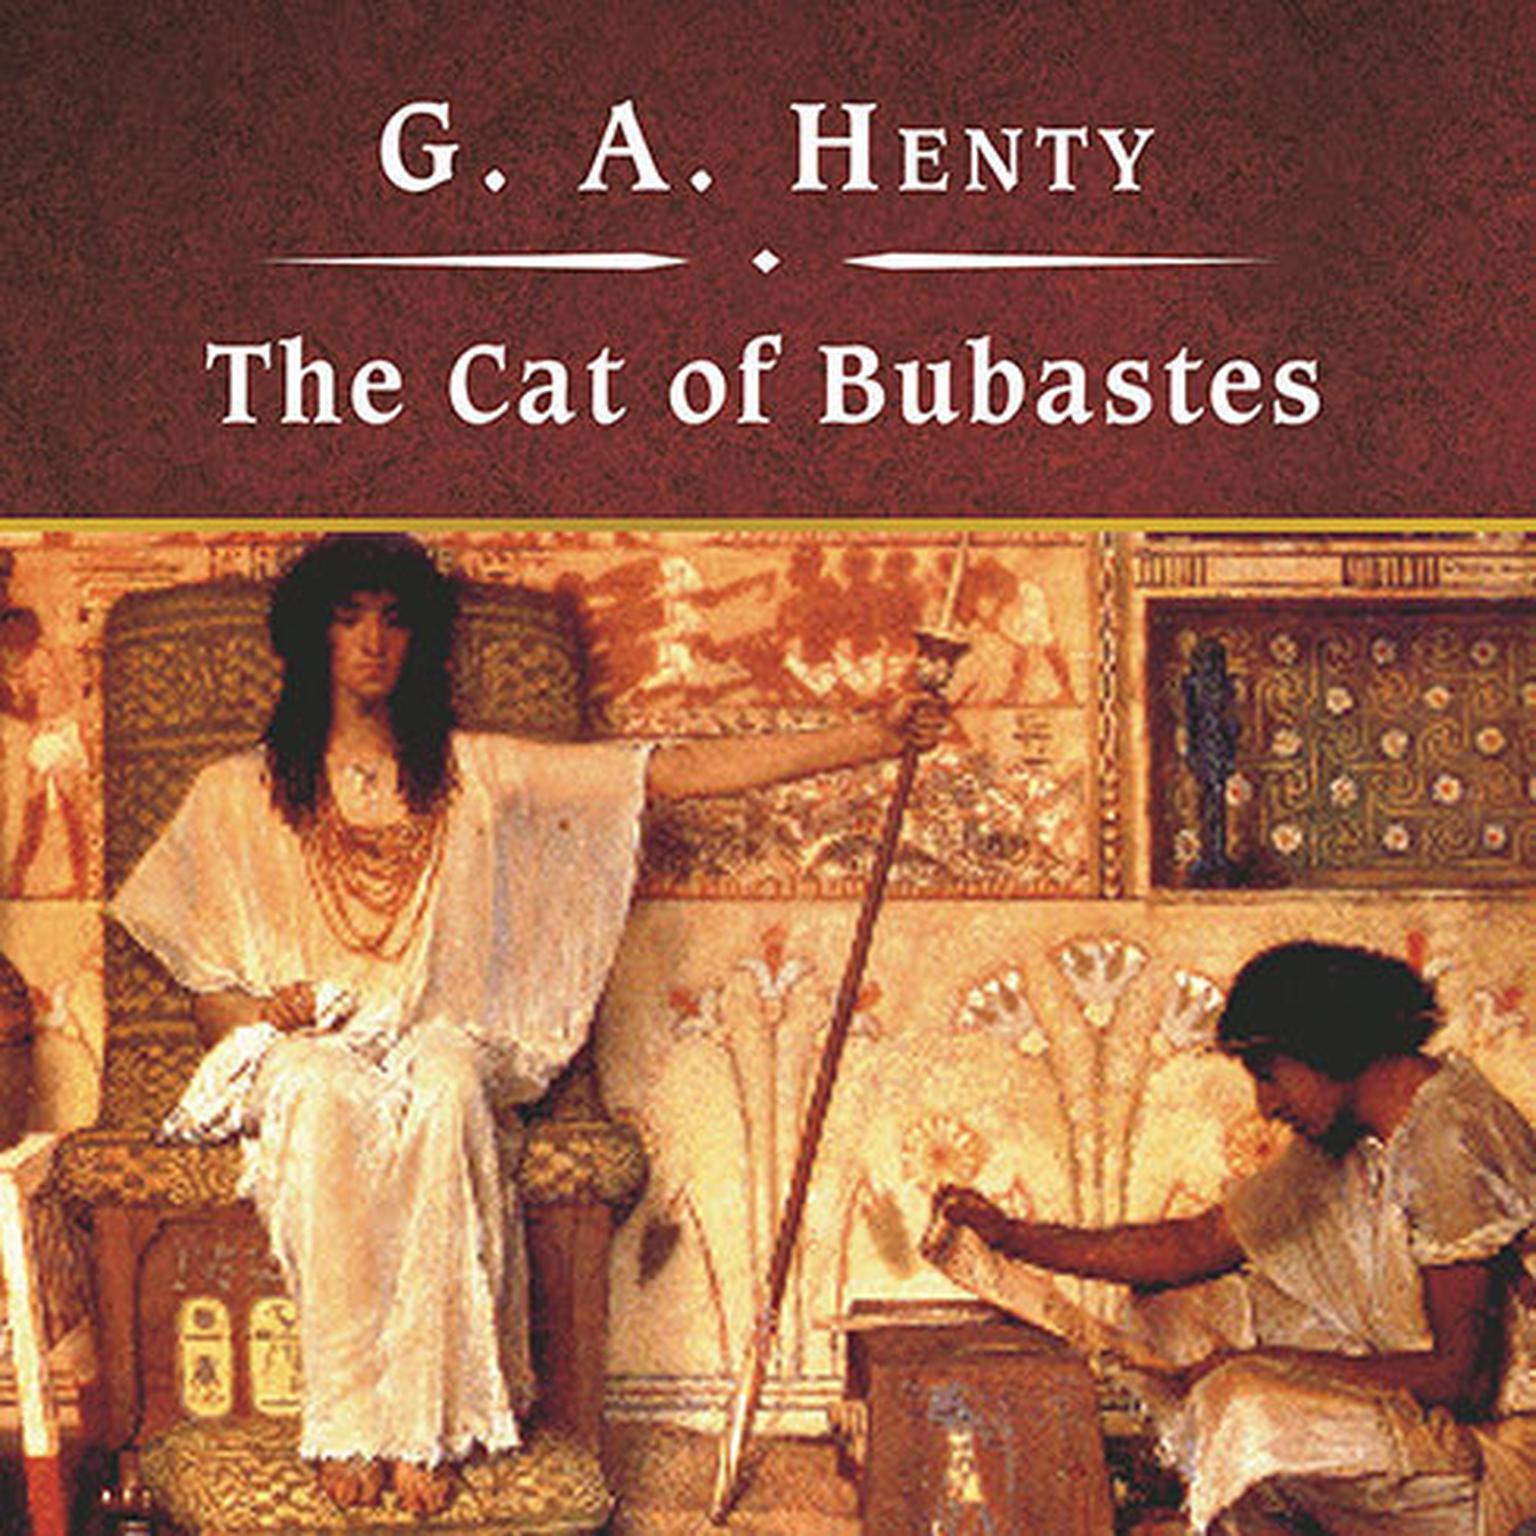 The Cat of Bubastes, with eBook Audiobook, by G. A. Henty